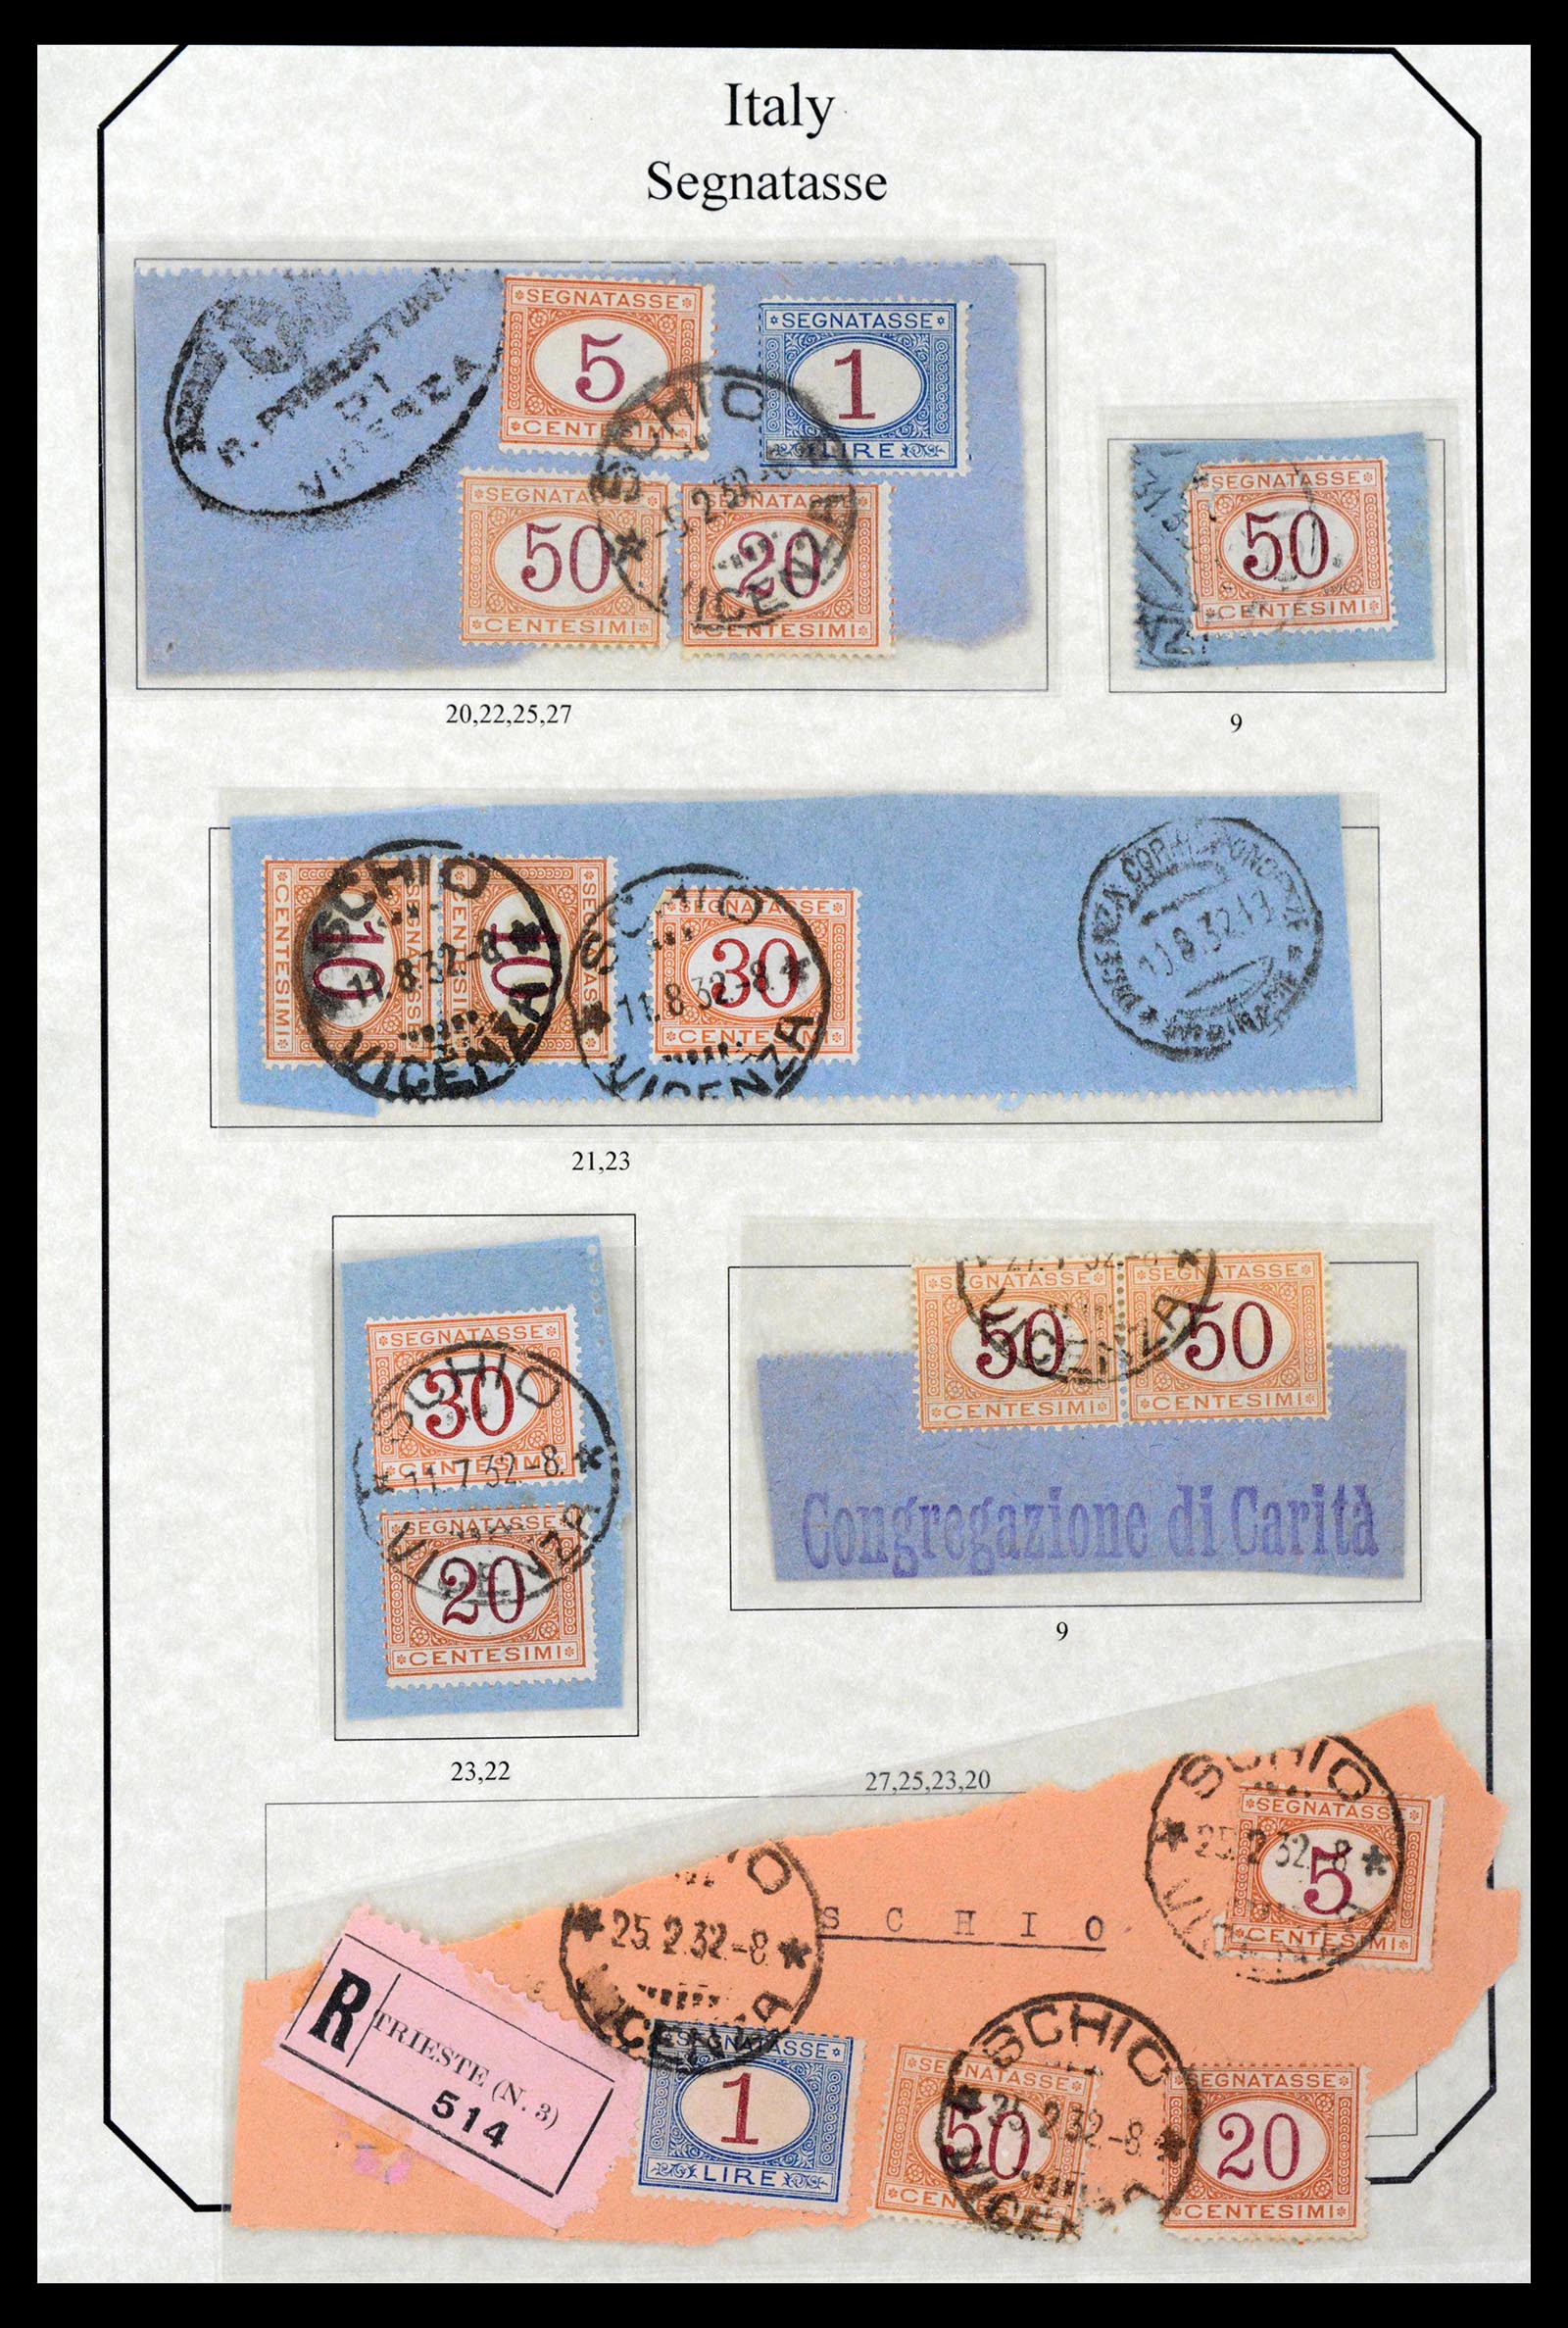 39022 0031 - Stamp collection 39022 Italy postage dues 1861-2000.